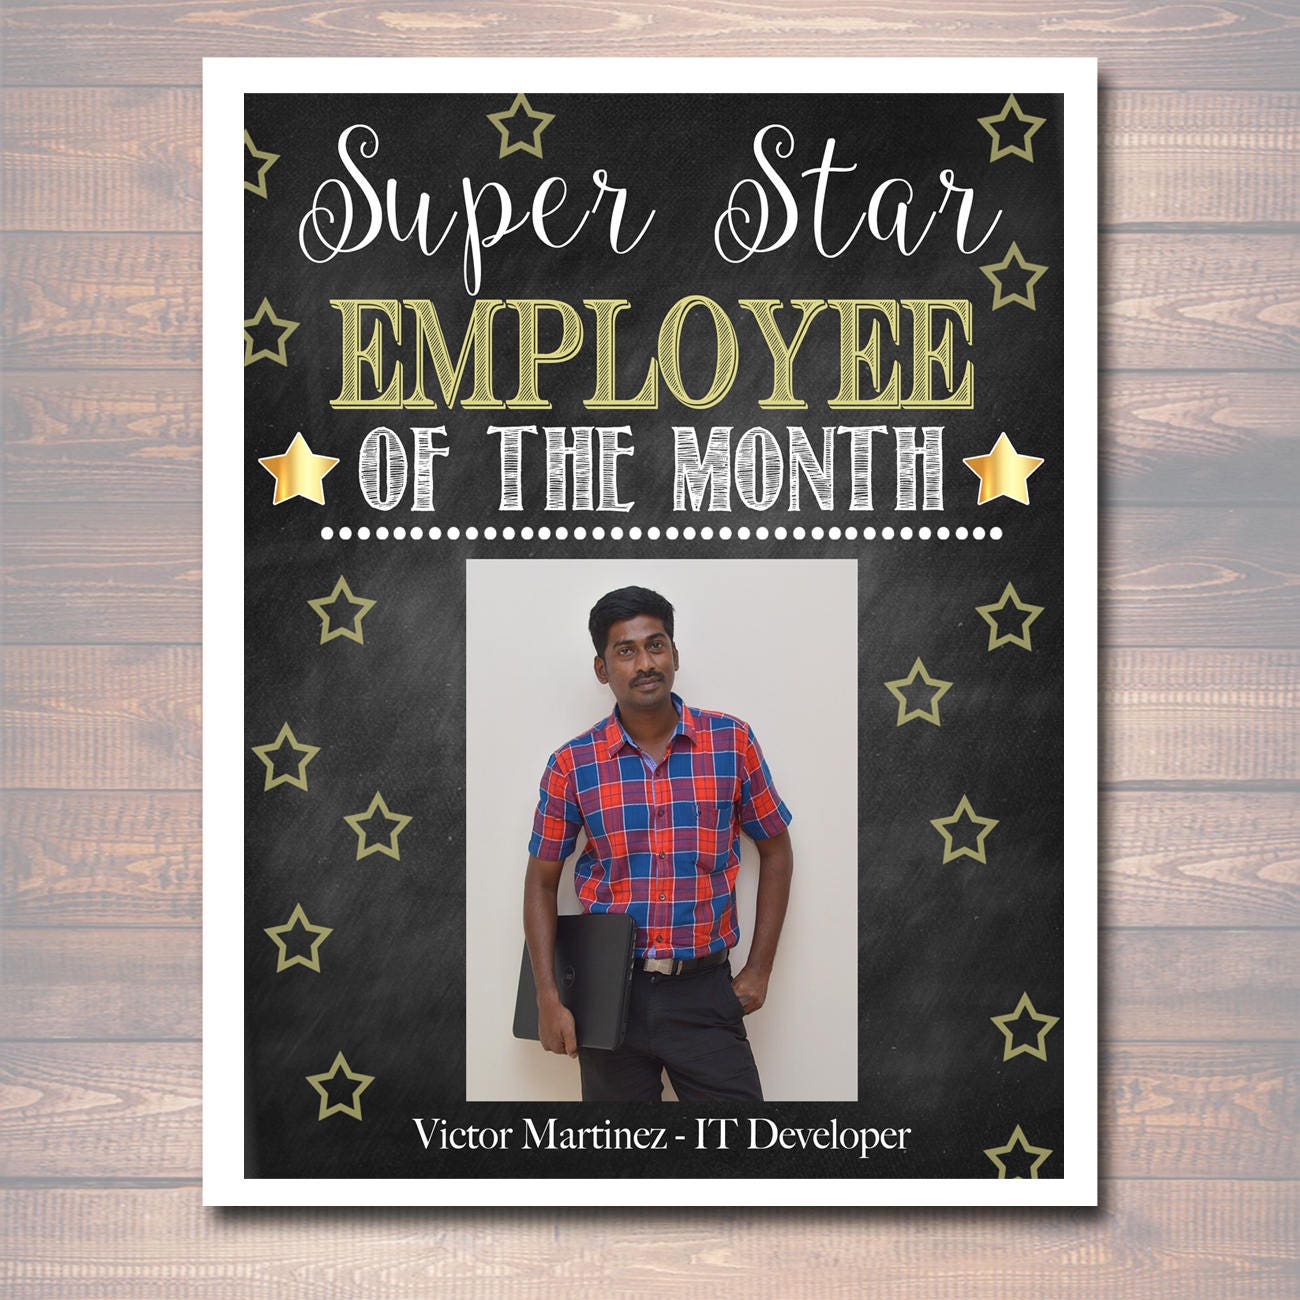 employee-of-the-month-template-word